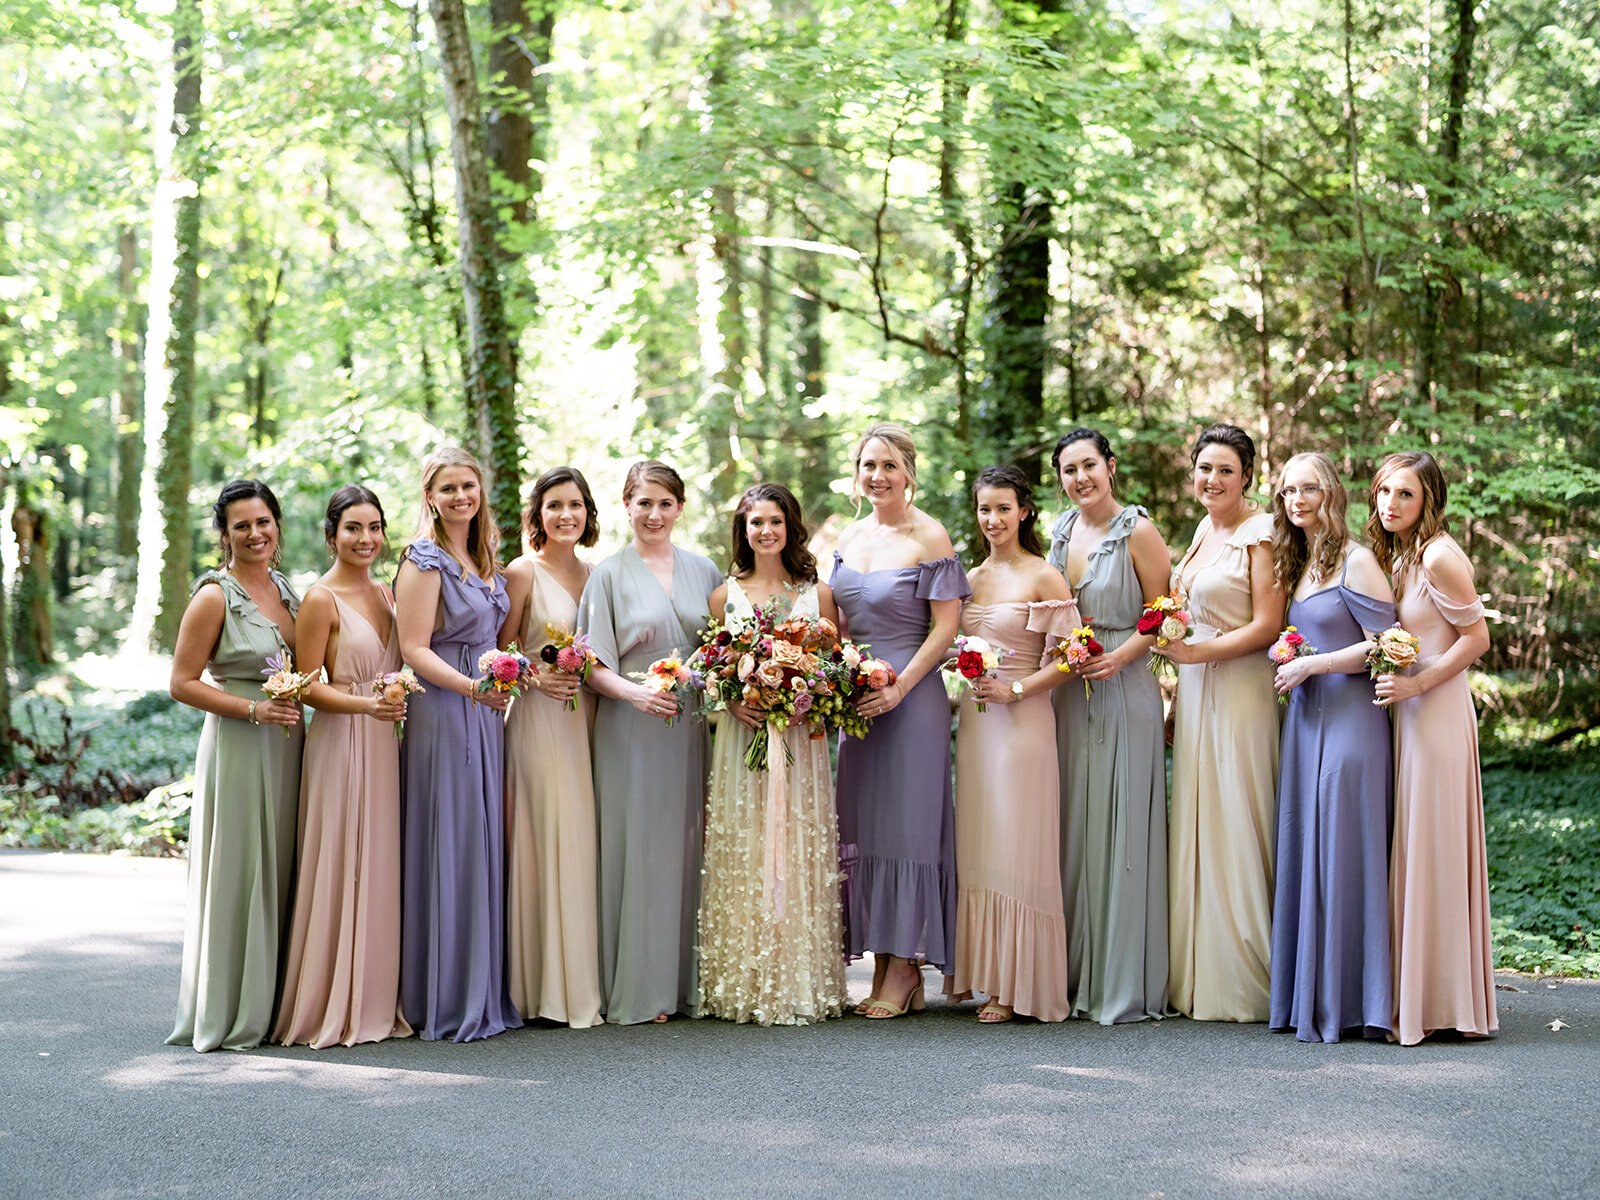 Bridesmaid dress in variety of pastel colors with brighter wildflower bouquets for an early fall wedding at RT Lodge. Flowers by Rosemary & Finch floral design, based in Nashville, TN.